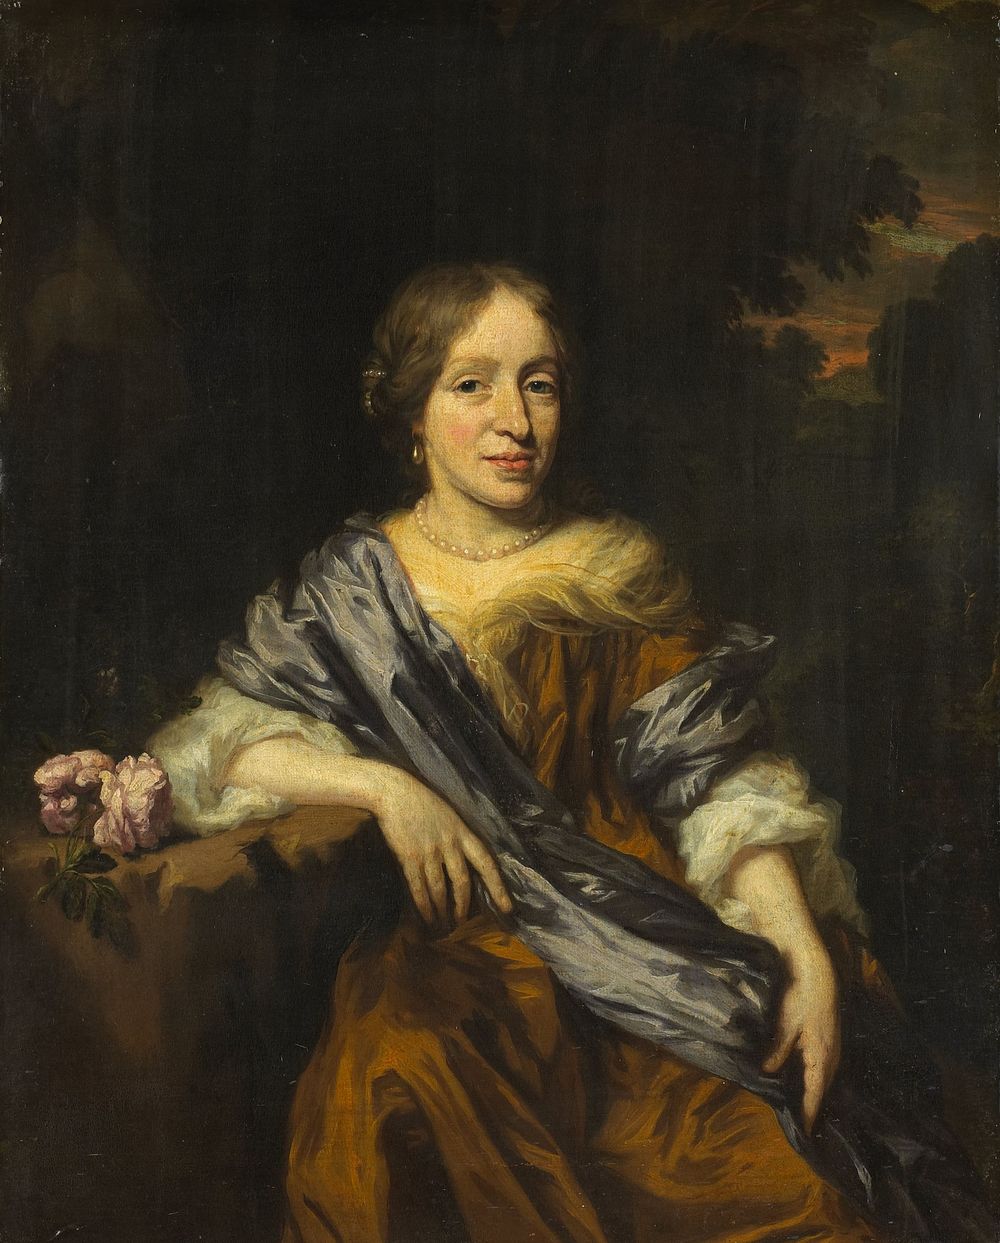 Portrait of Catharina Pottey, Sister of Willem and Sara Pottey (1661 - 1693) by Nicolaes Maes